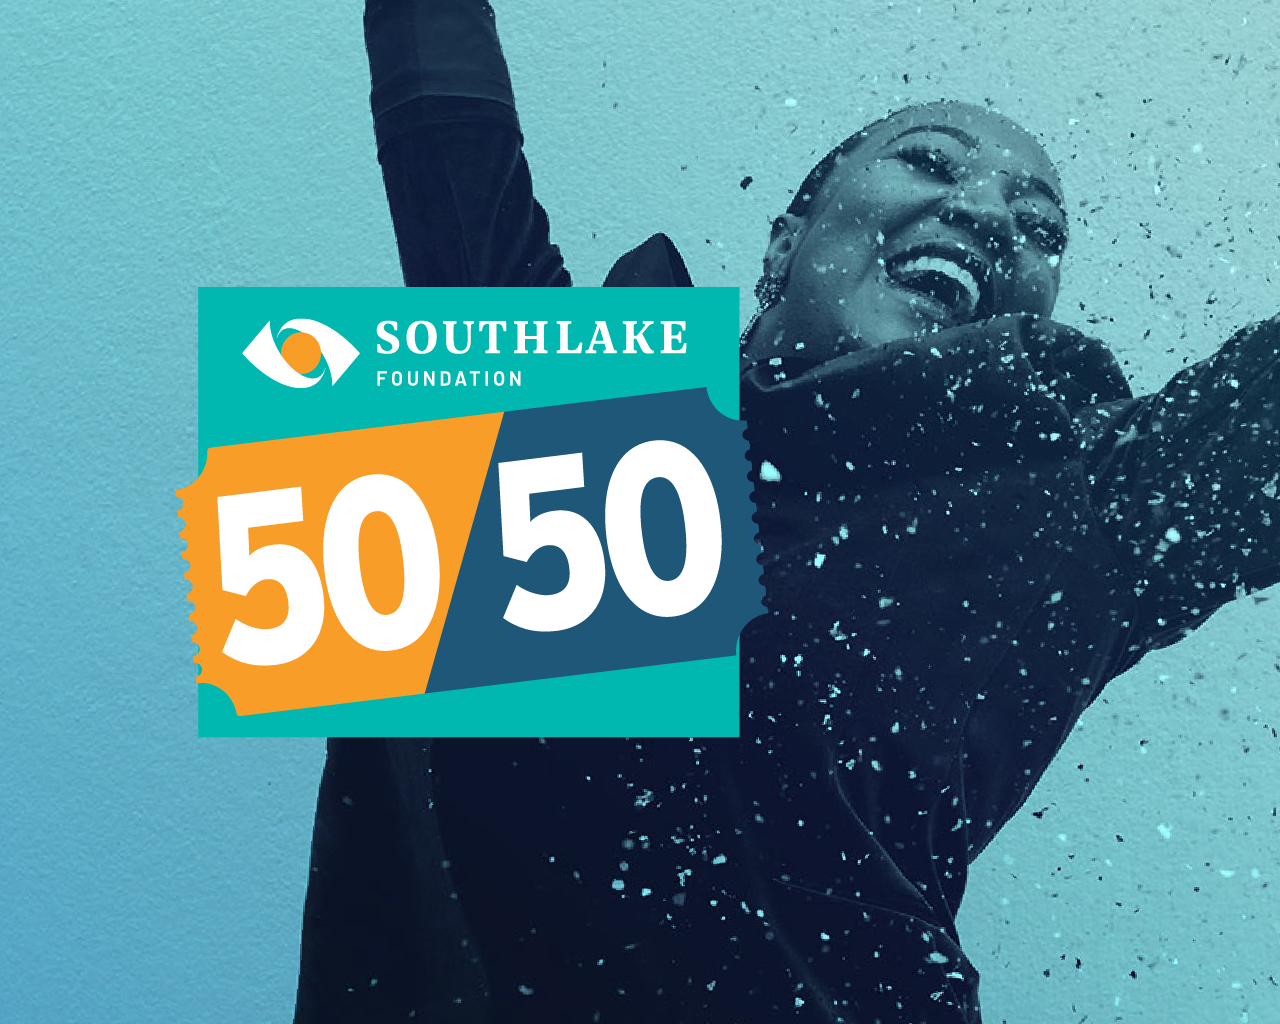 Southlake 5050 Raffle tickets on sale now